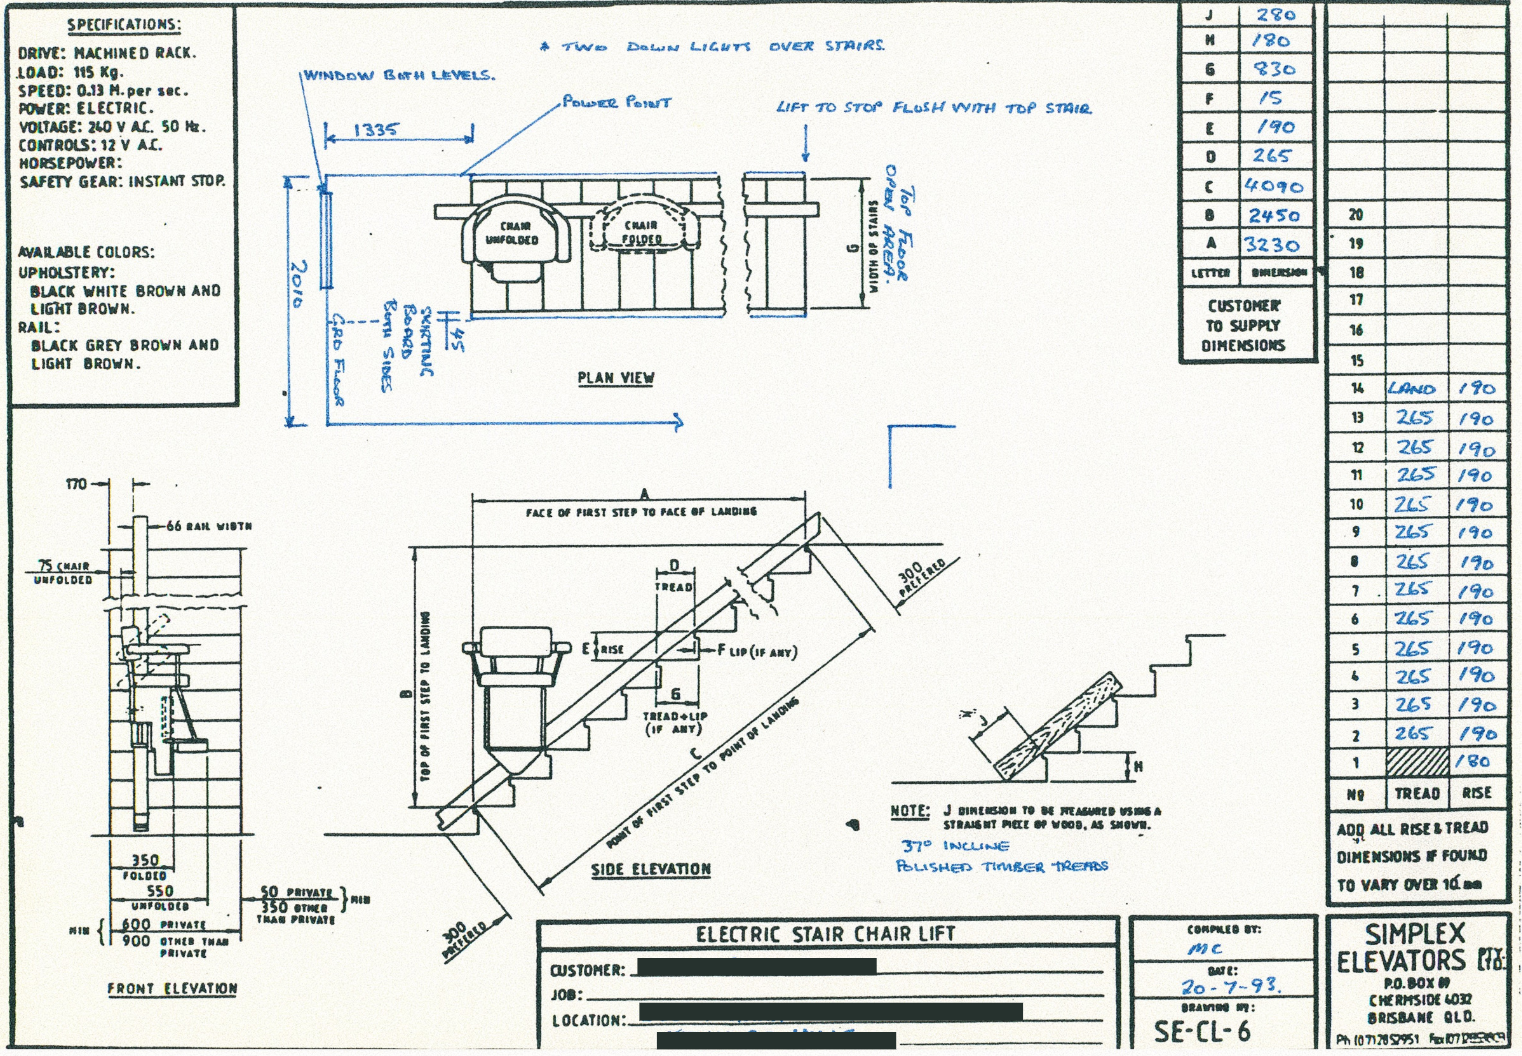 Blueprints of stair lift